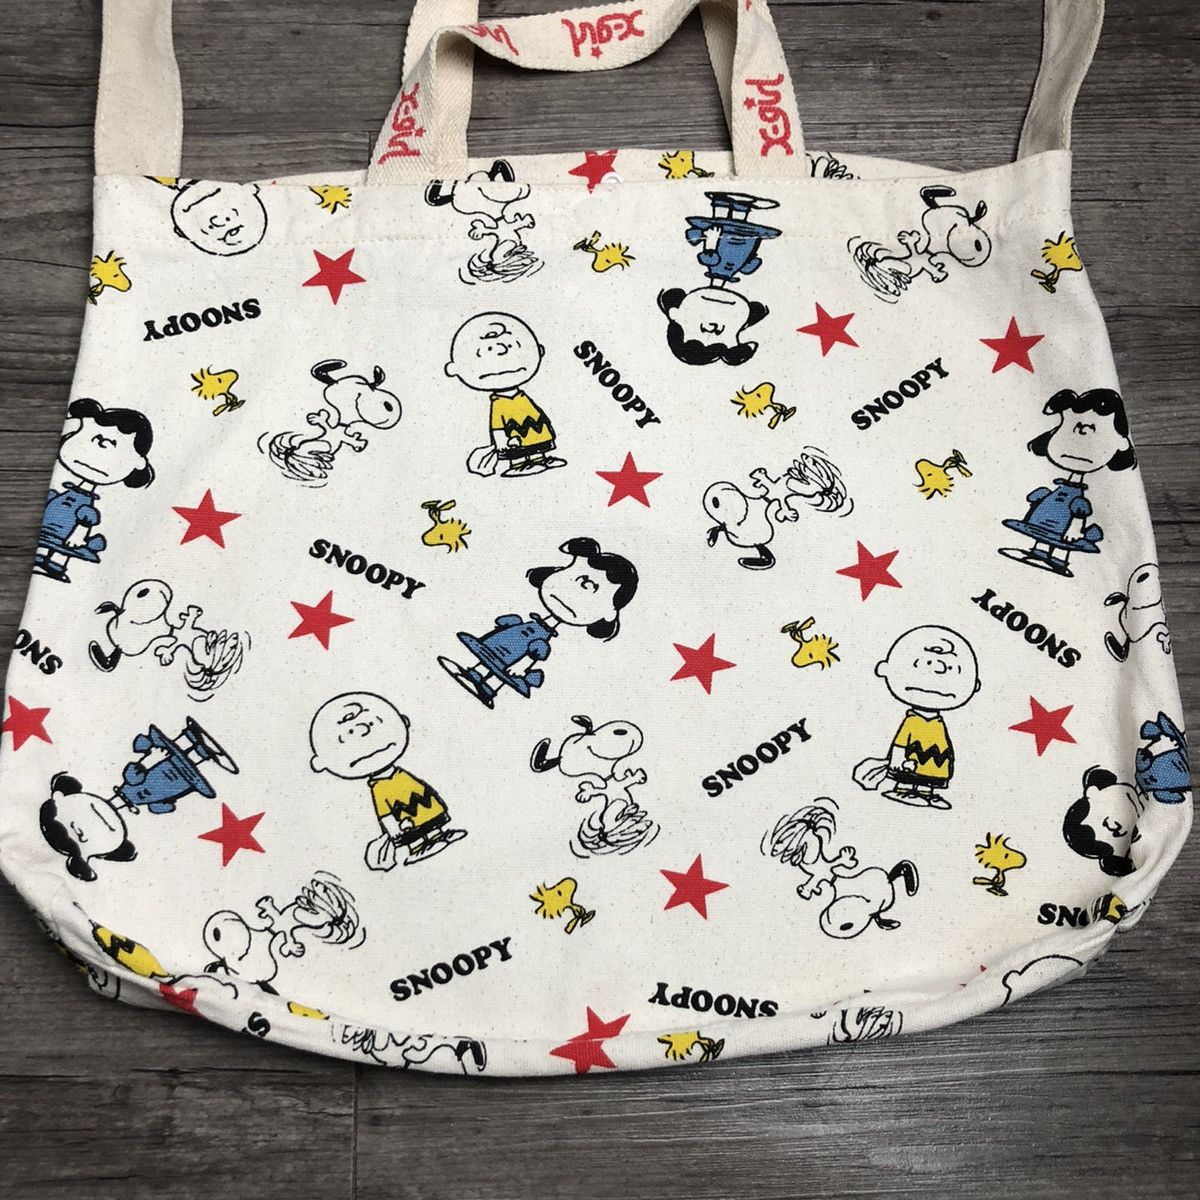 Vintage Peanuts x xgirl snoopy tote bag Size ONE SIZE - 3 Thumbnail